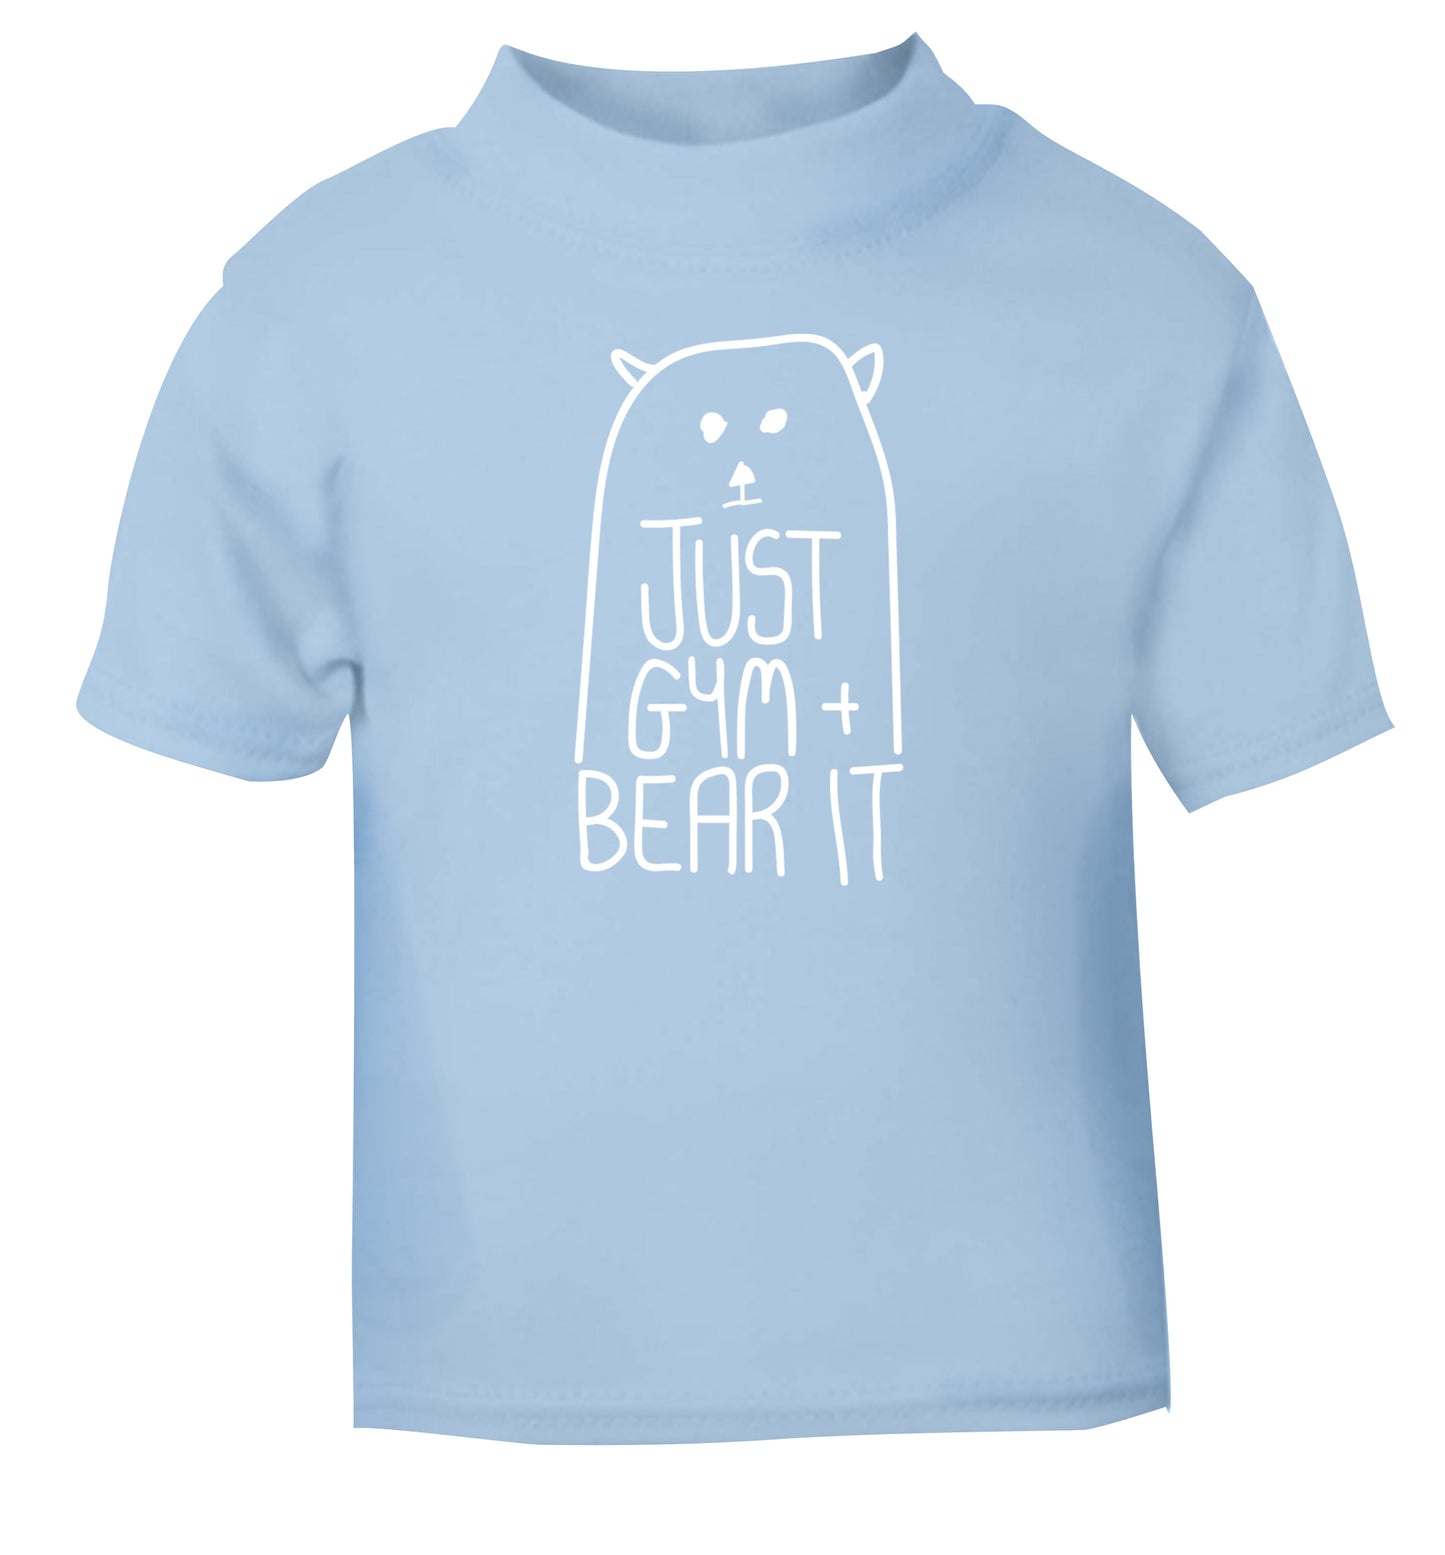 Just gym and bear it light blue Baby Toddler Tshirt 2 Years